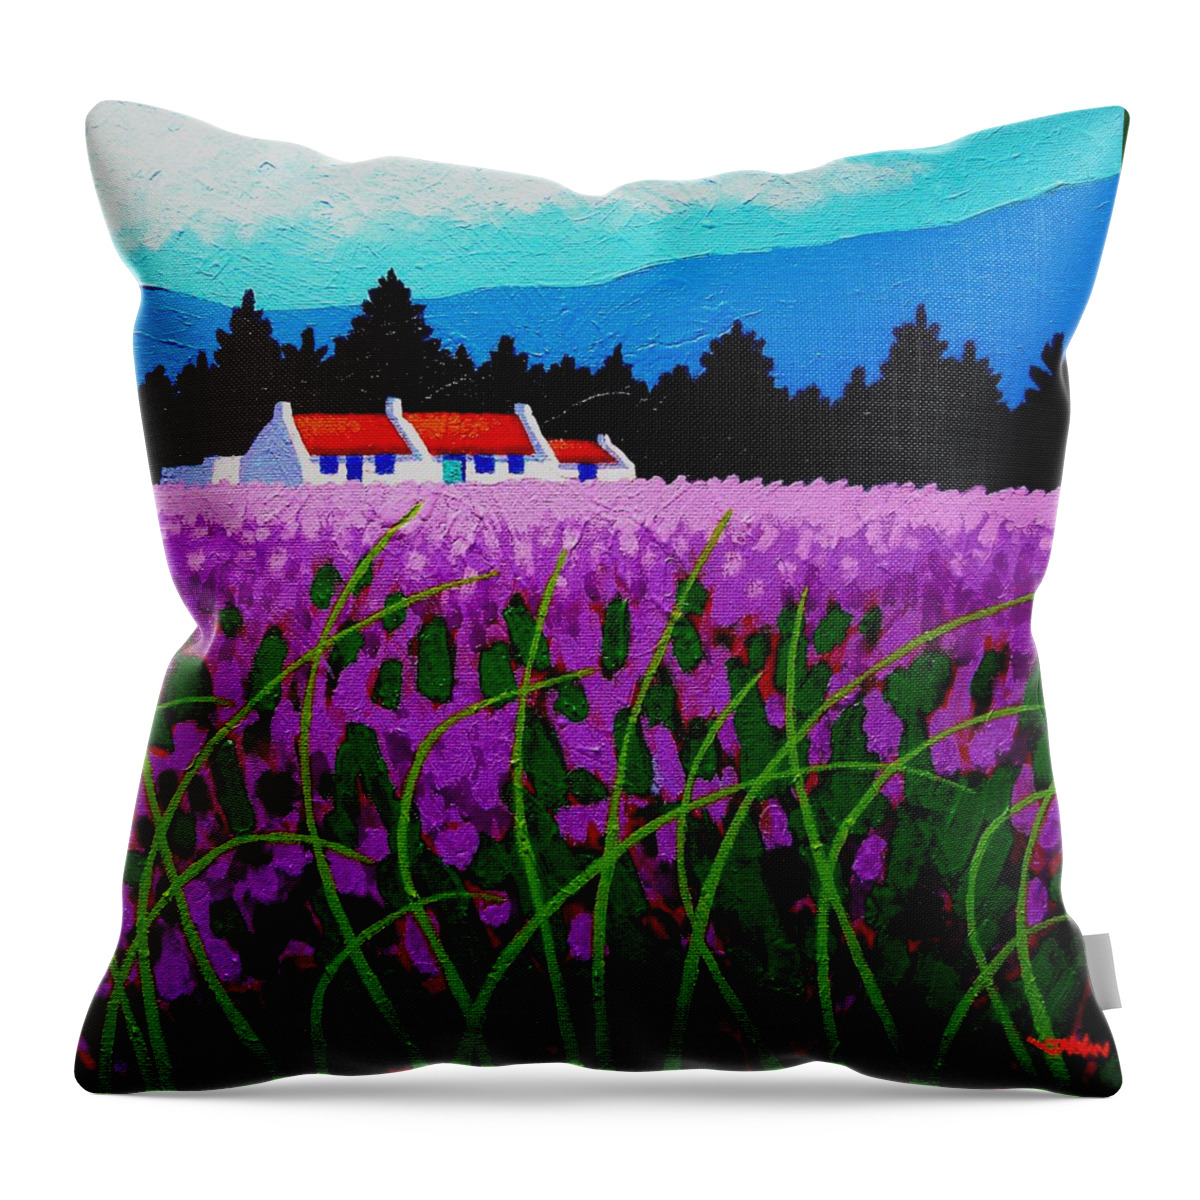 Lavender Throw Pillow featuring the painting Lavender Field - County Wicklow - Ireland by John Nolan